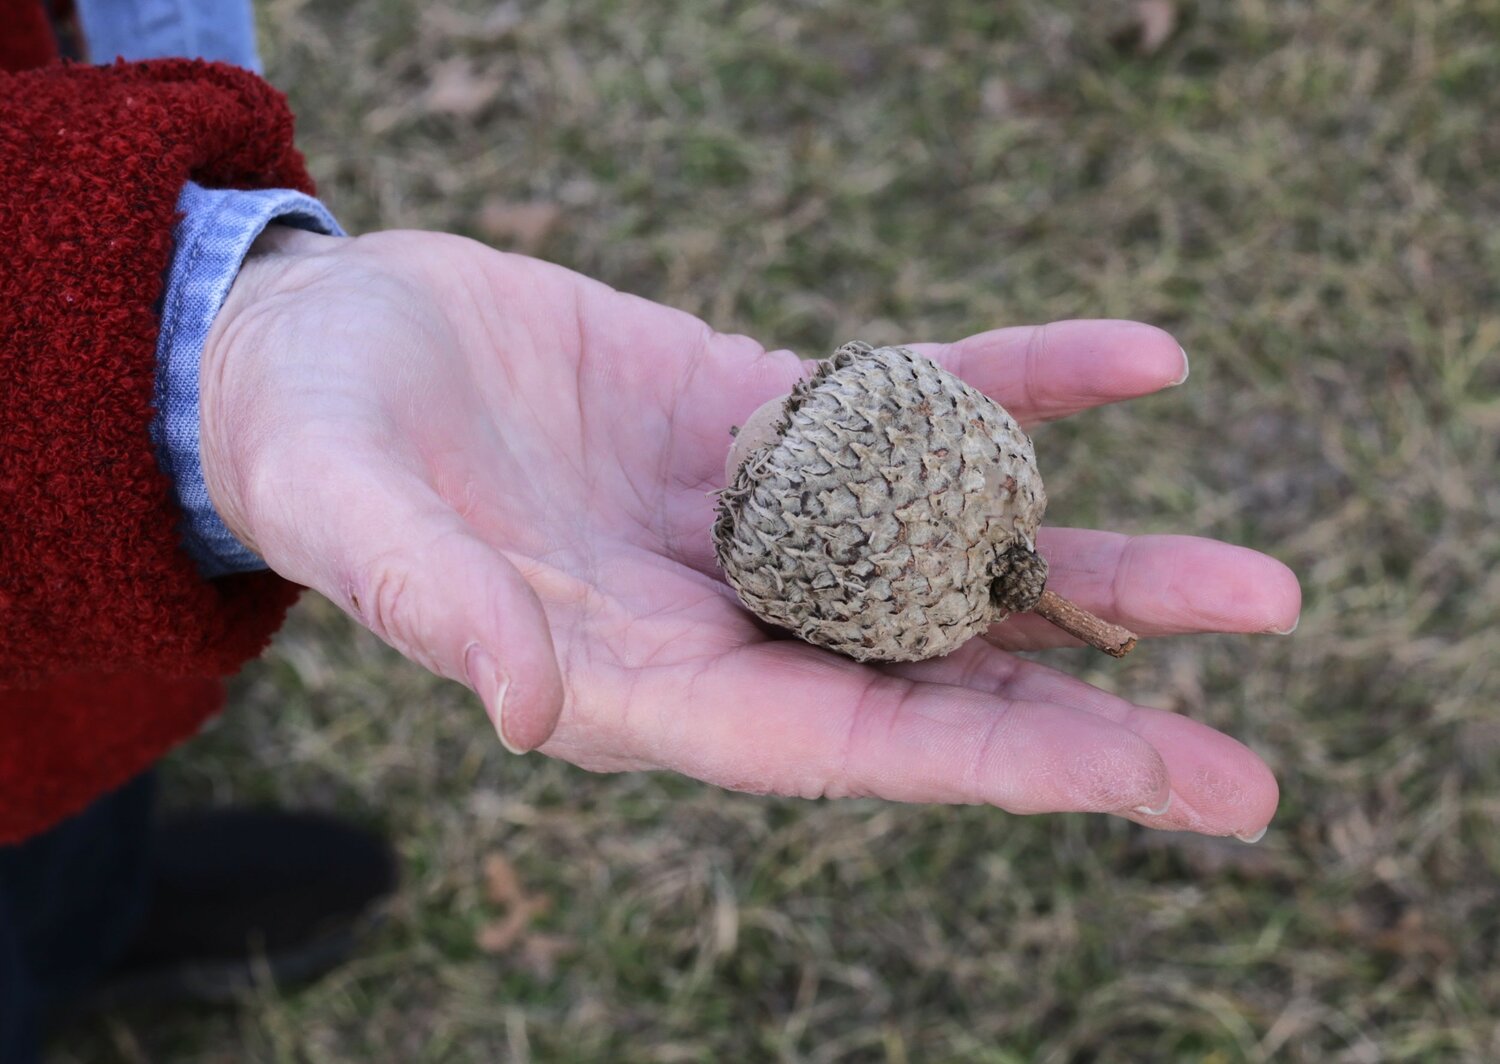 The size of the bur oak acorn should make it a collectible item for preserve visitors.